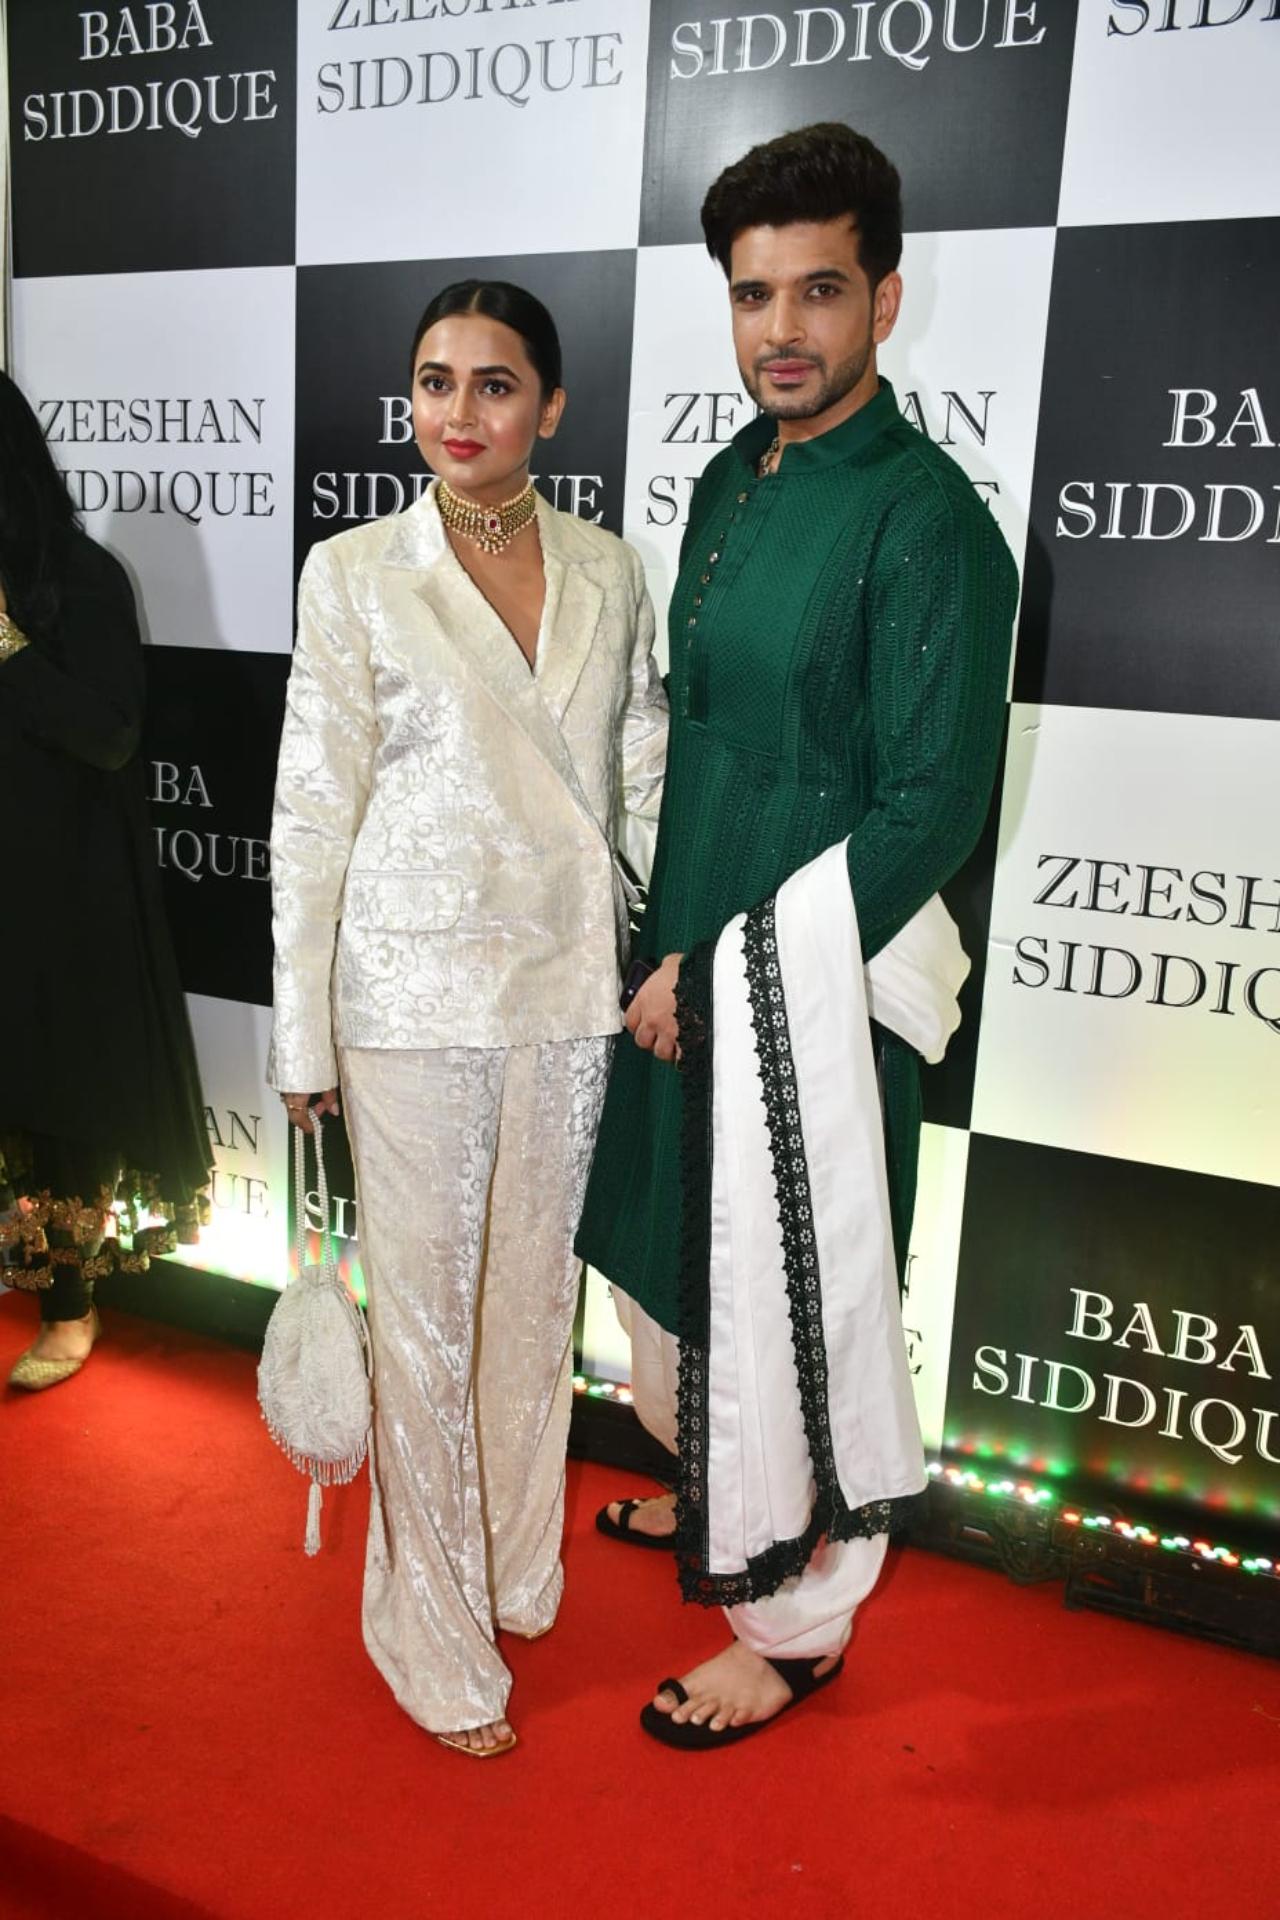 Television's favourite couple Tejasswi Prakash and Karan Kundrra arrived together for the party and posed for the paparazzi. Karan went desi with a green kurta, while Tejasswi opted for a white pant suit for the night